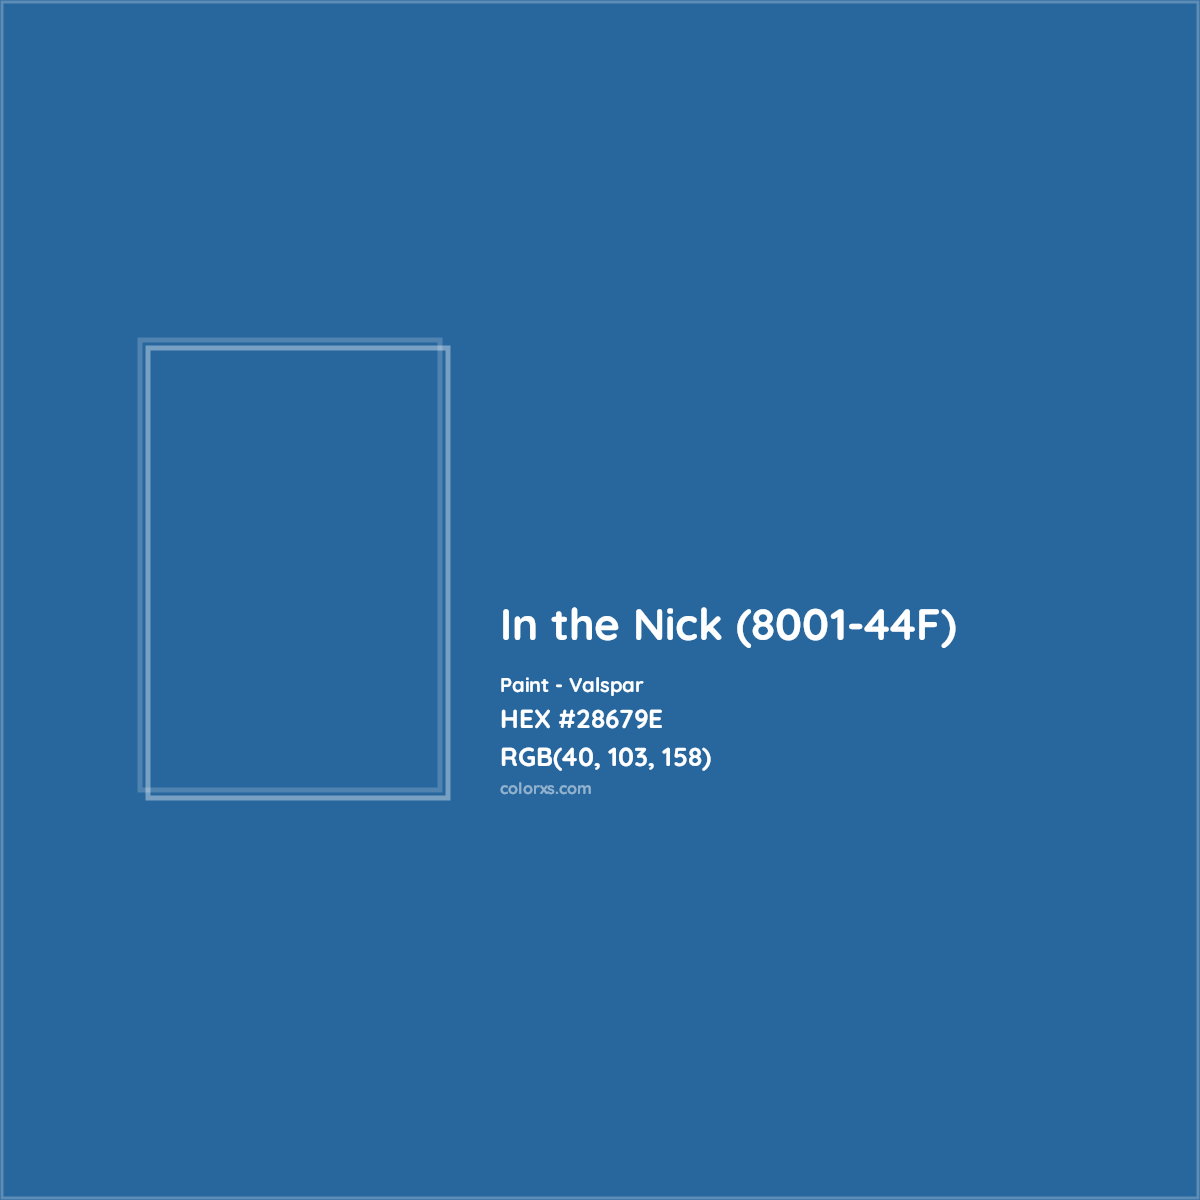 HEX #28679E In the Nick (8001-44F) Paint Valspar - Color Code